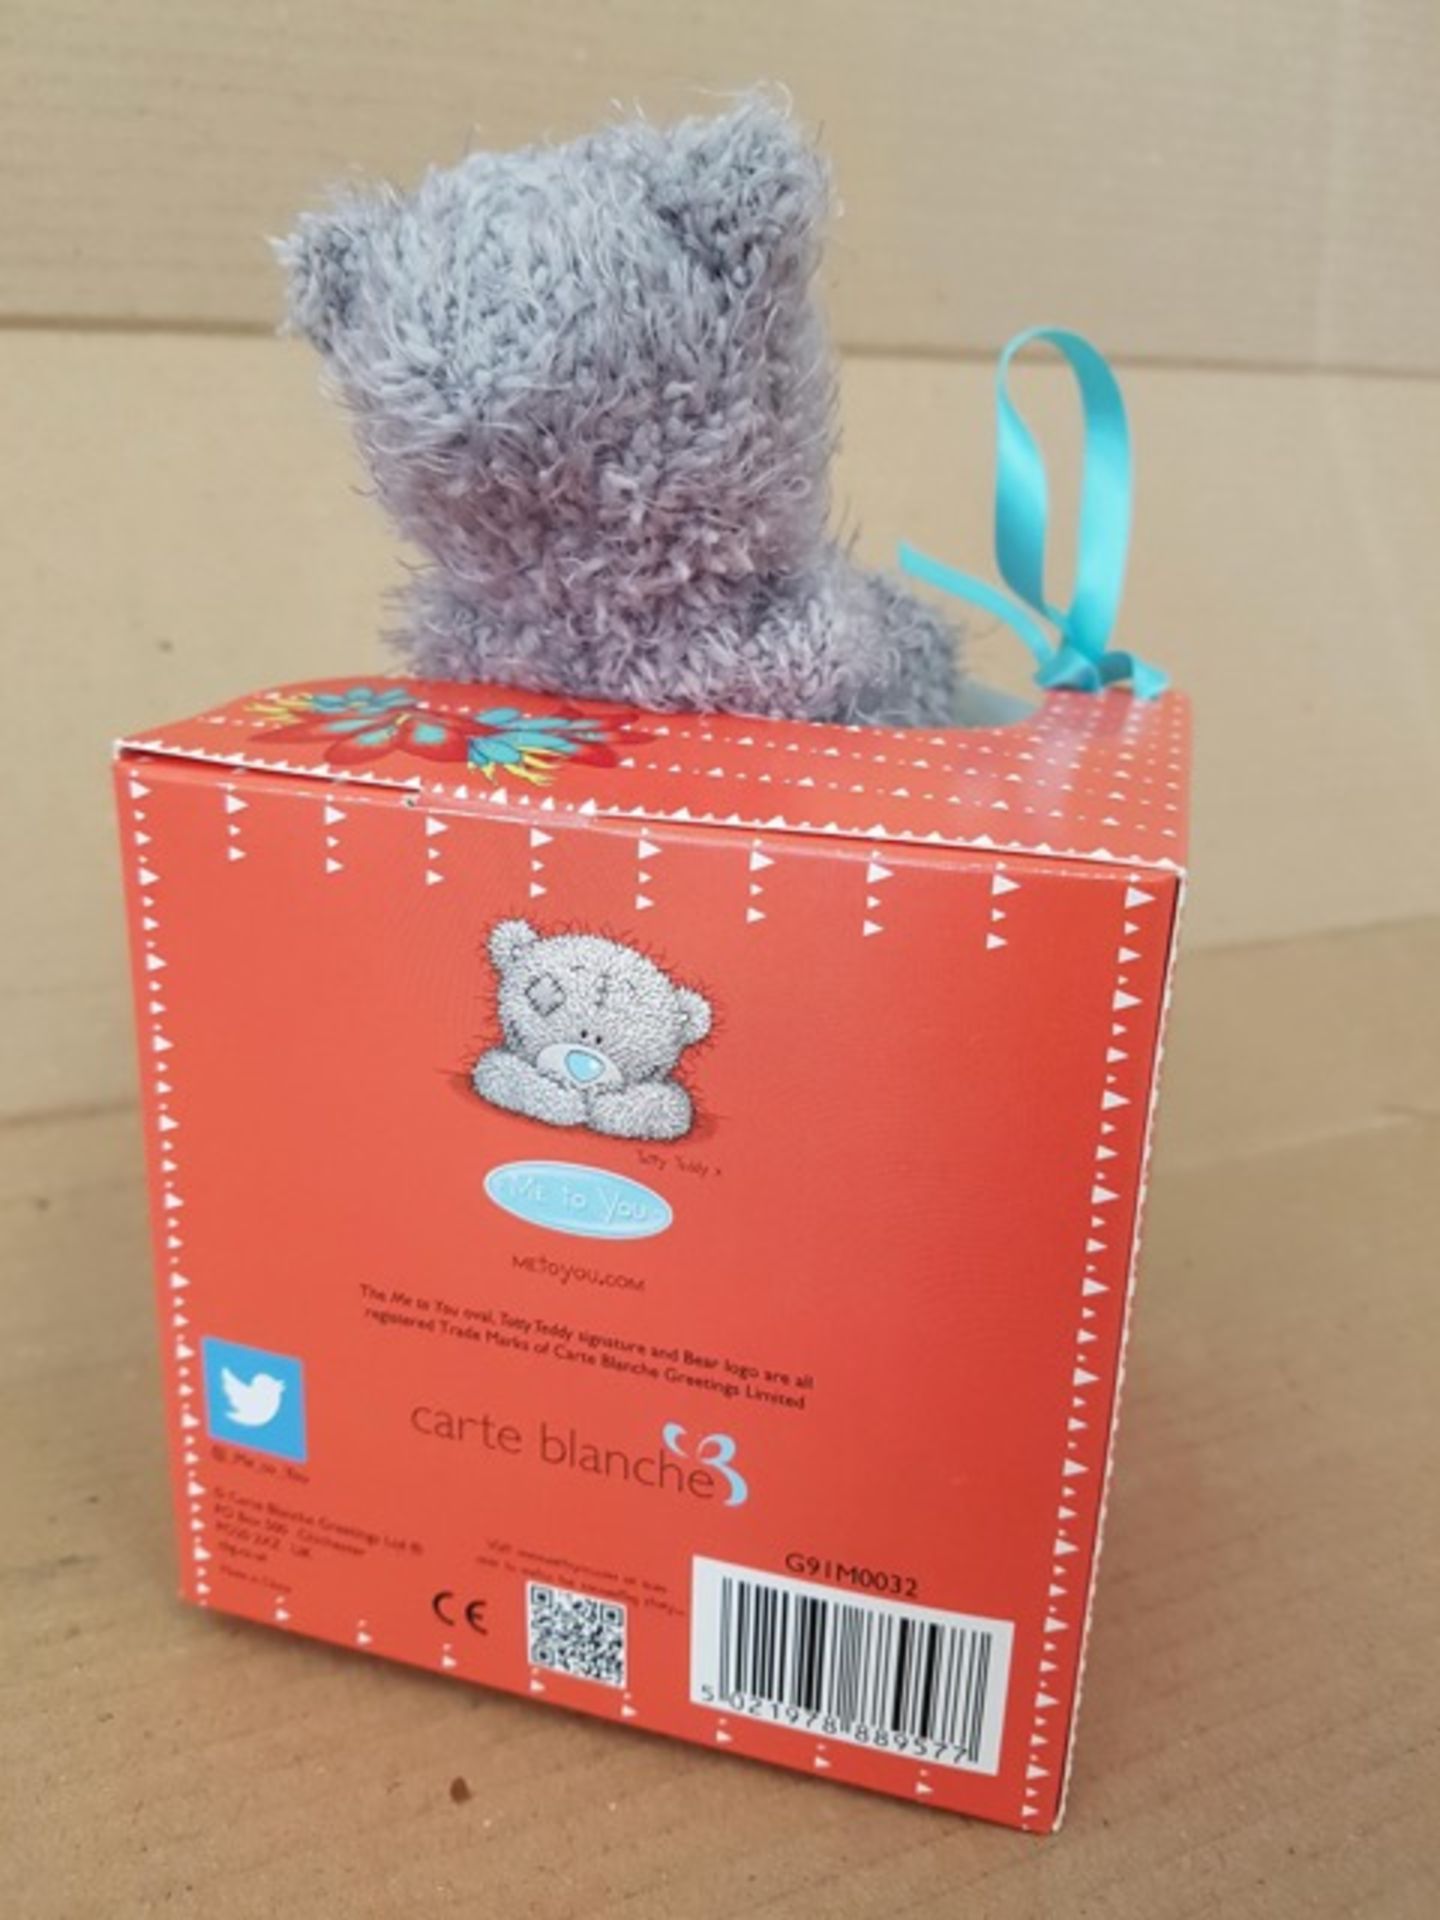 PALLET TO CONTAIN 180 x Brand New Me To You Lots of Love Mug & Tatty Teddy Set's - Image 4 of 4